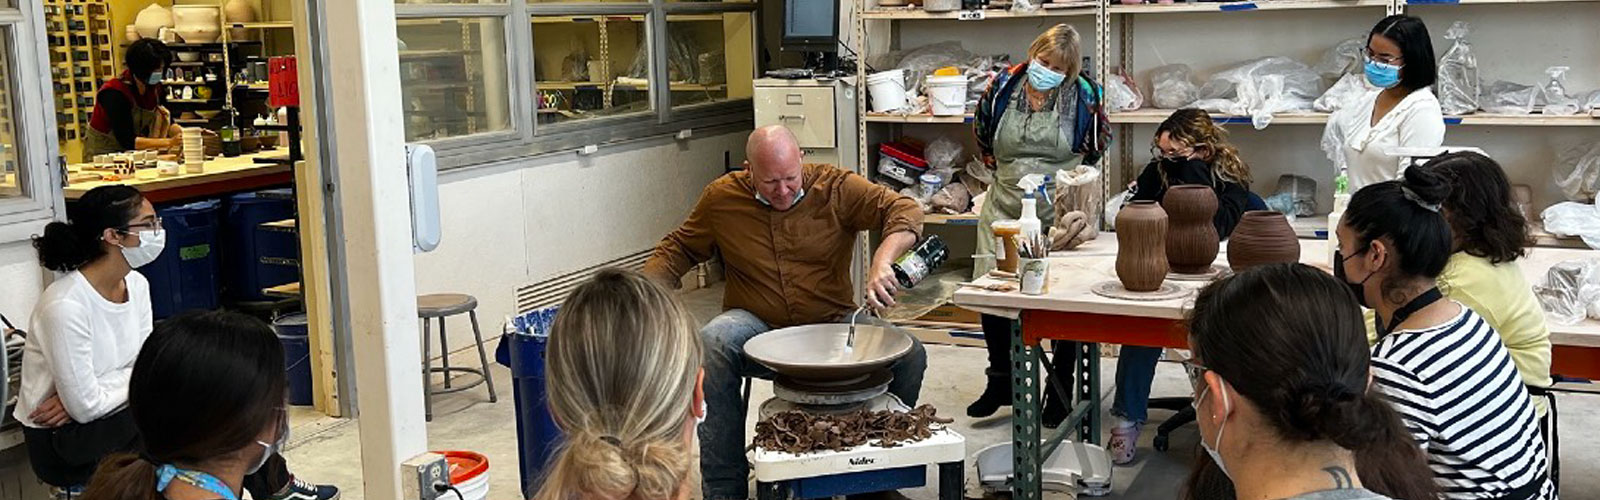 Pottery Classes and Studios - List of Pottery Classes